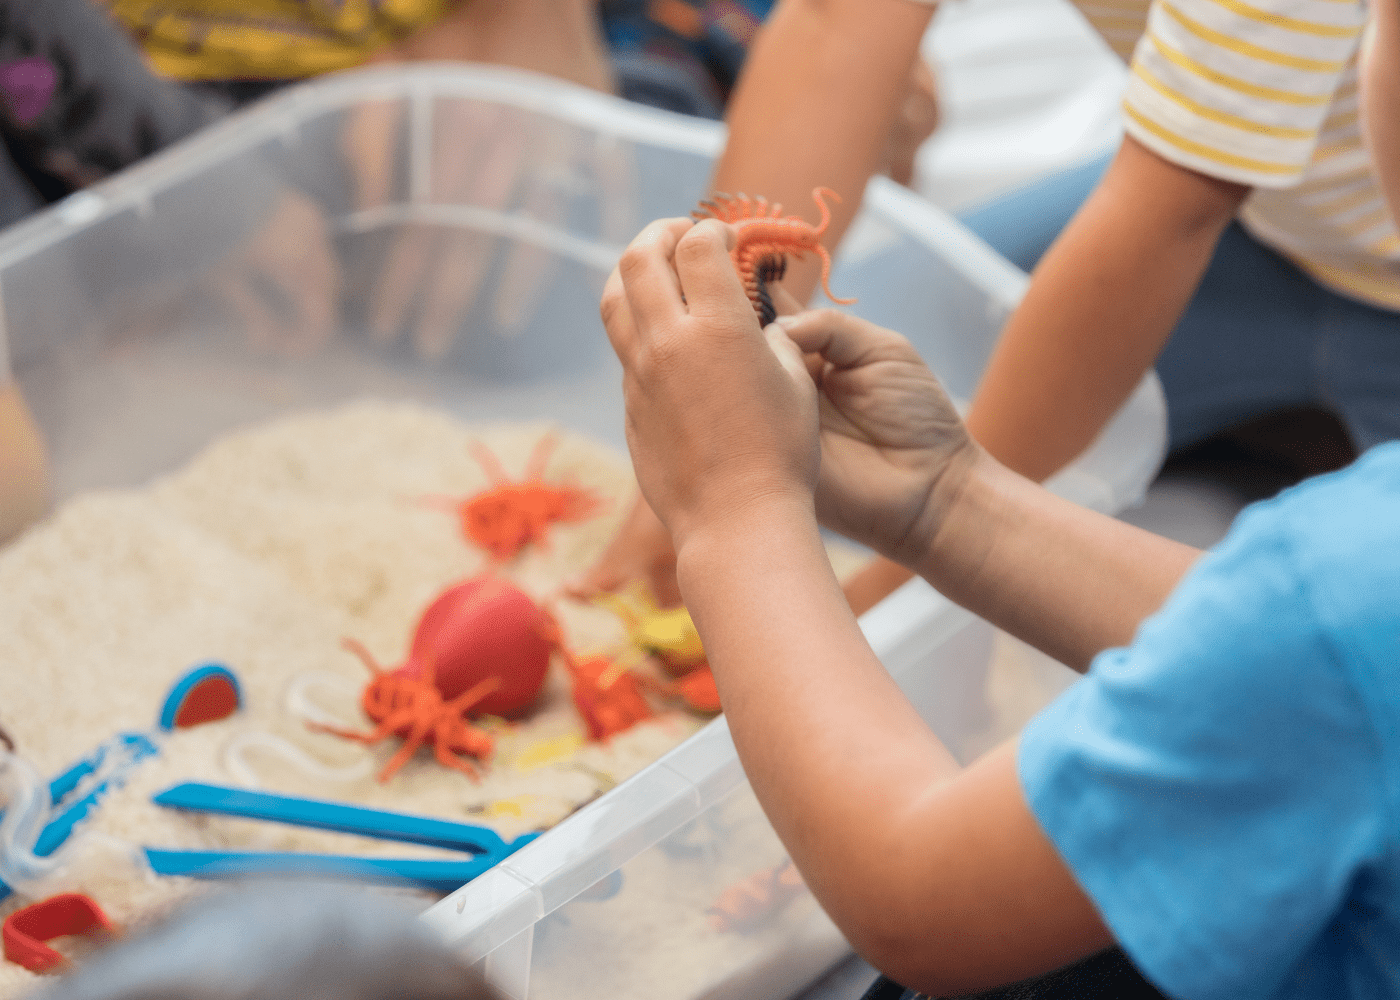 Sensory bin activities for toddlers. They are playing in a bin of rice with fake bugs and tweezers for fine motor development.